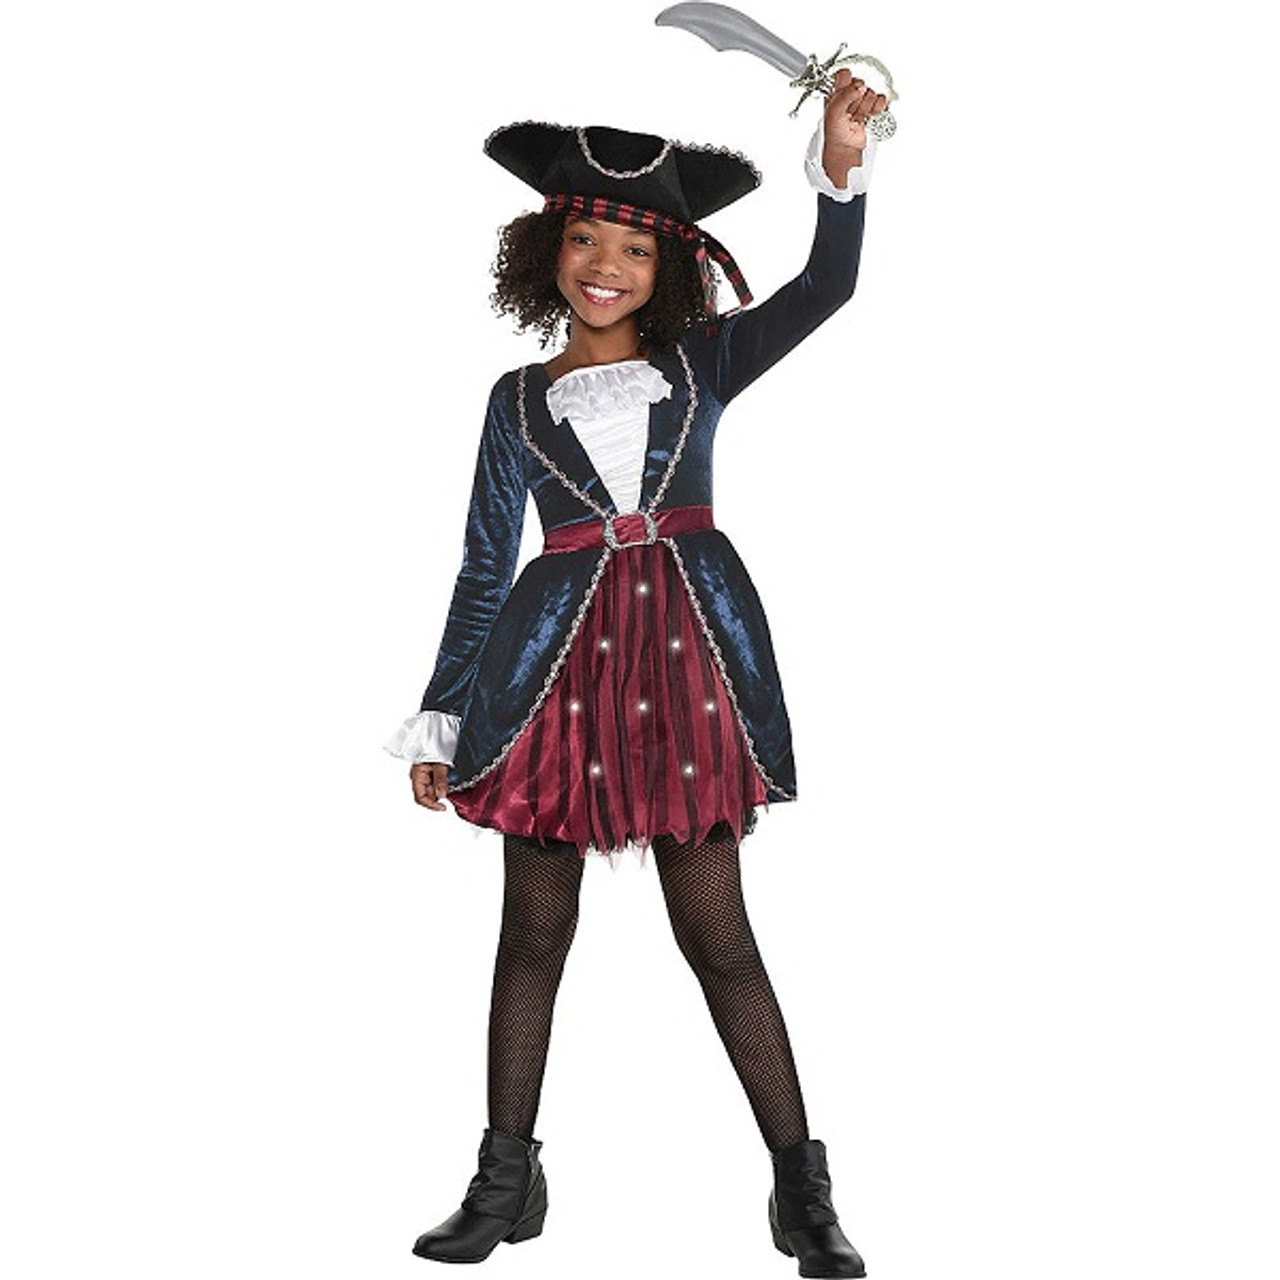 Light-Up Sparkle Pirate - Party Time, Inc.